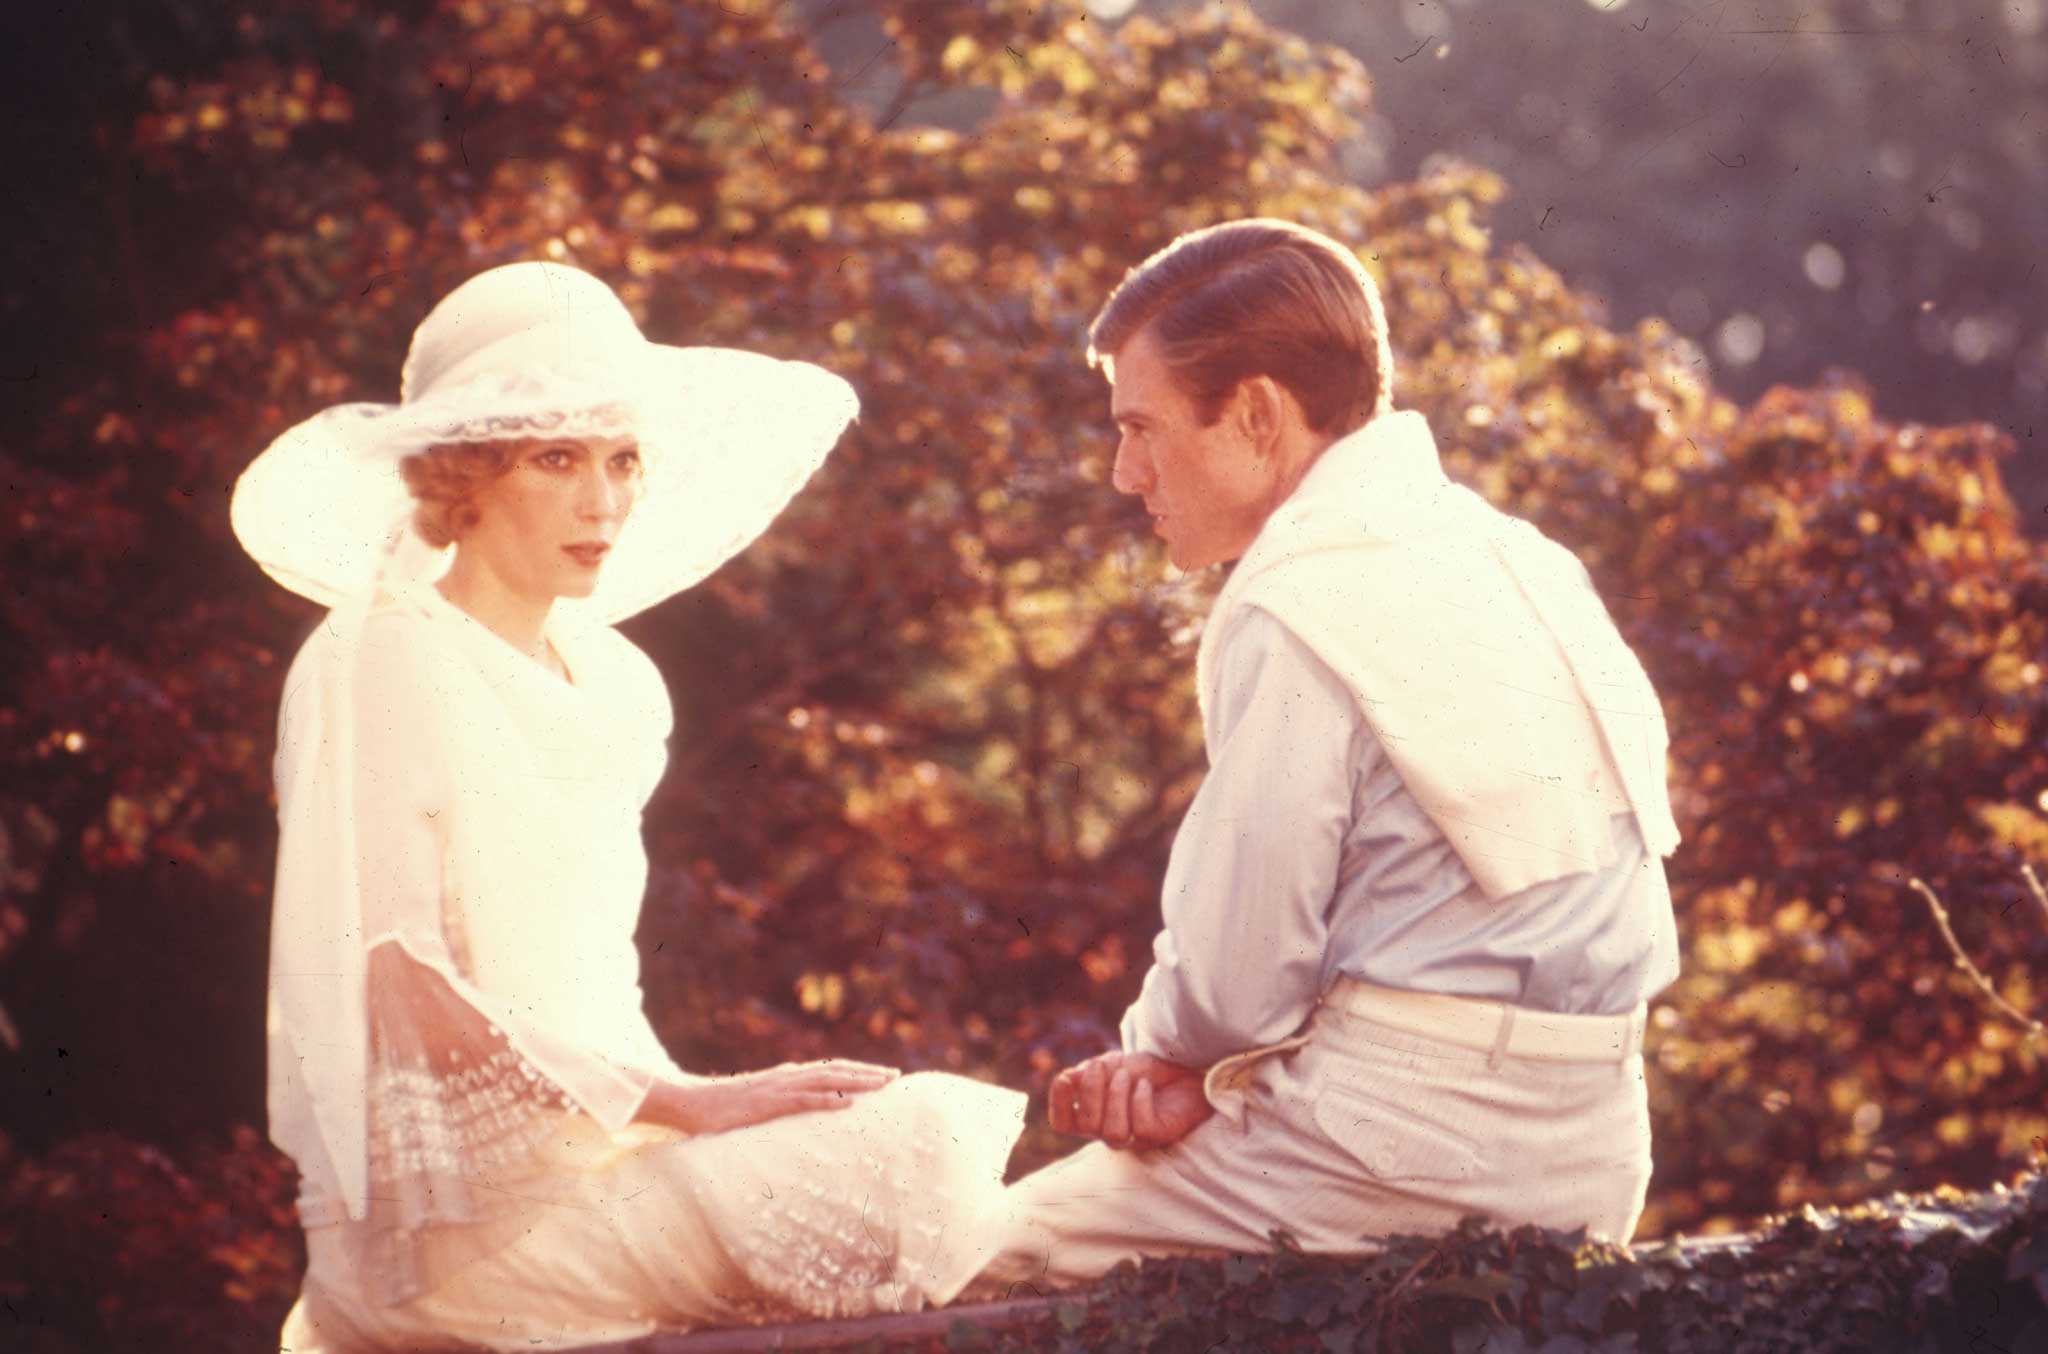 Robert Redford and Mia Farrow starred in The Great Gatsby in 1974